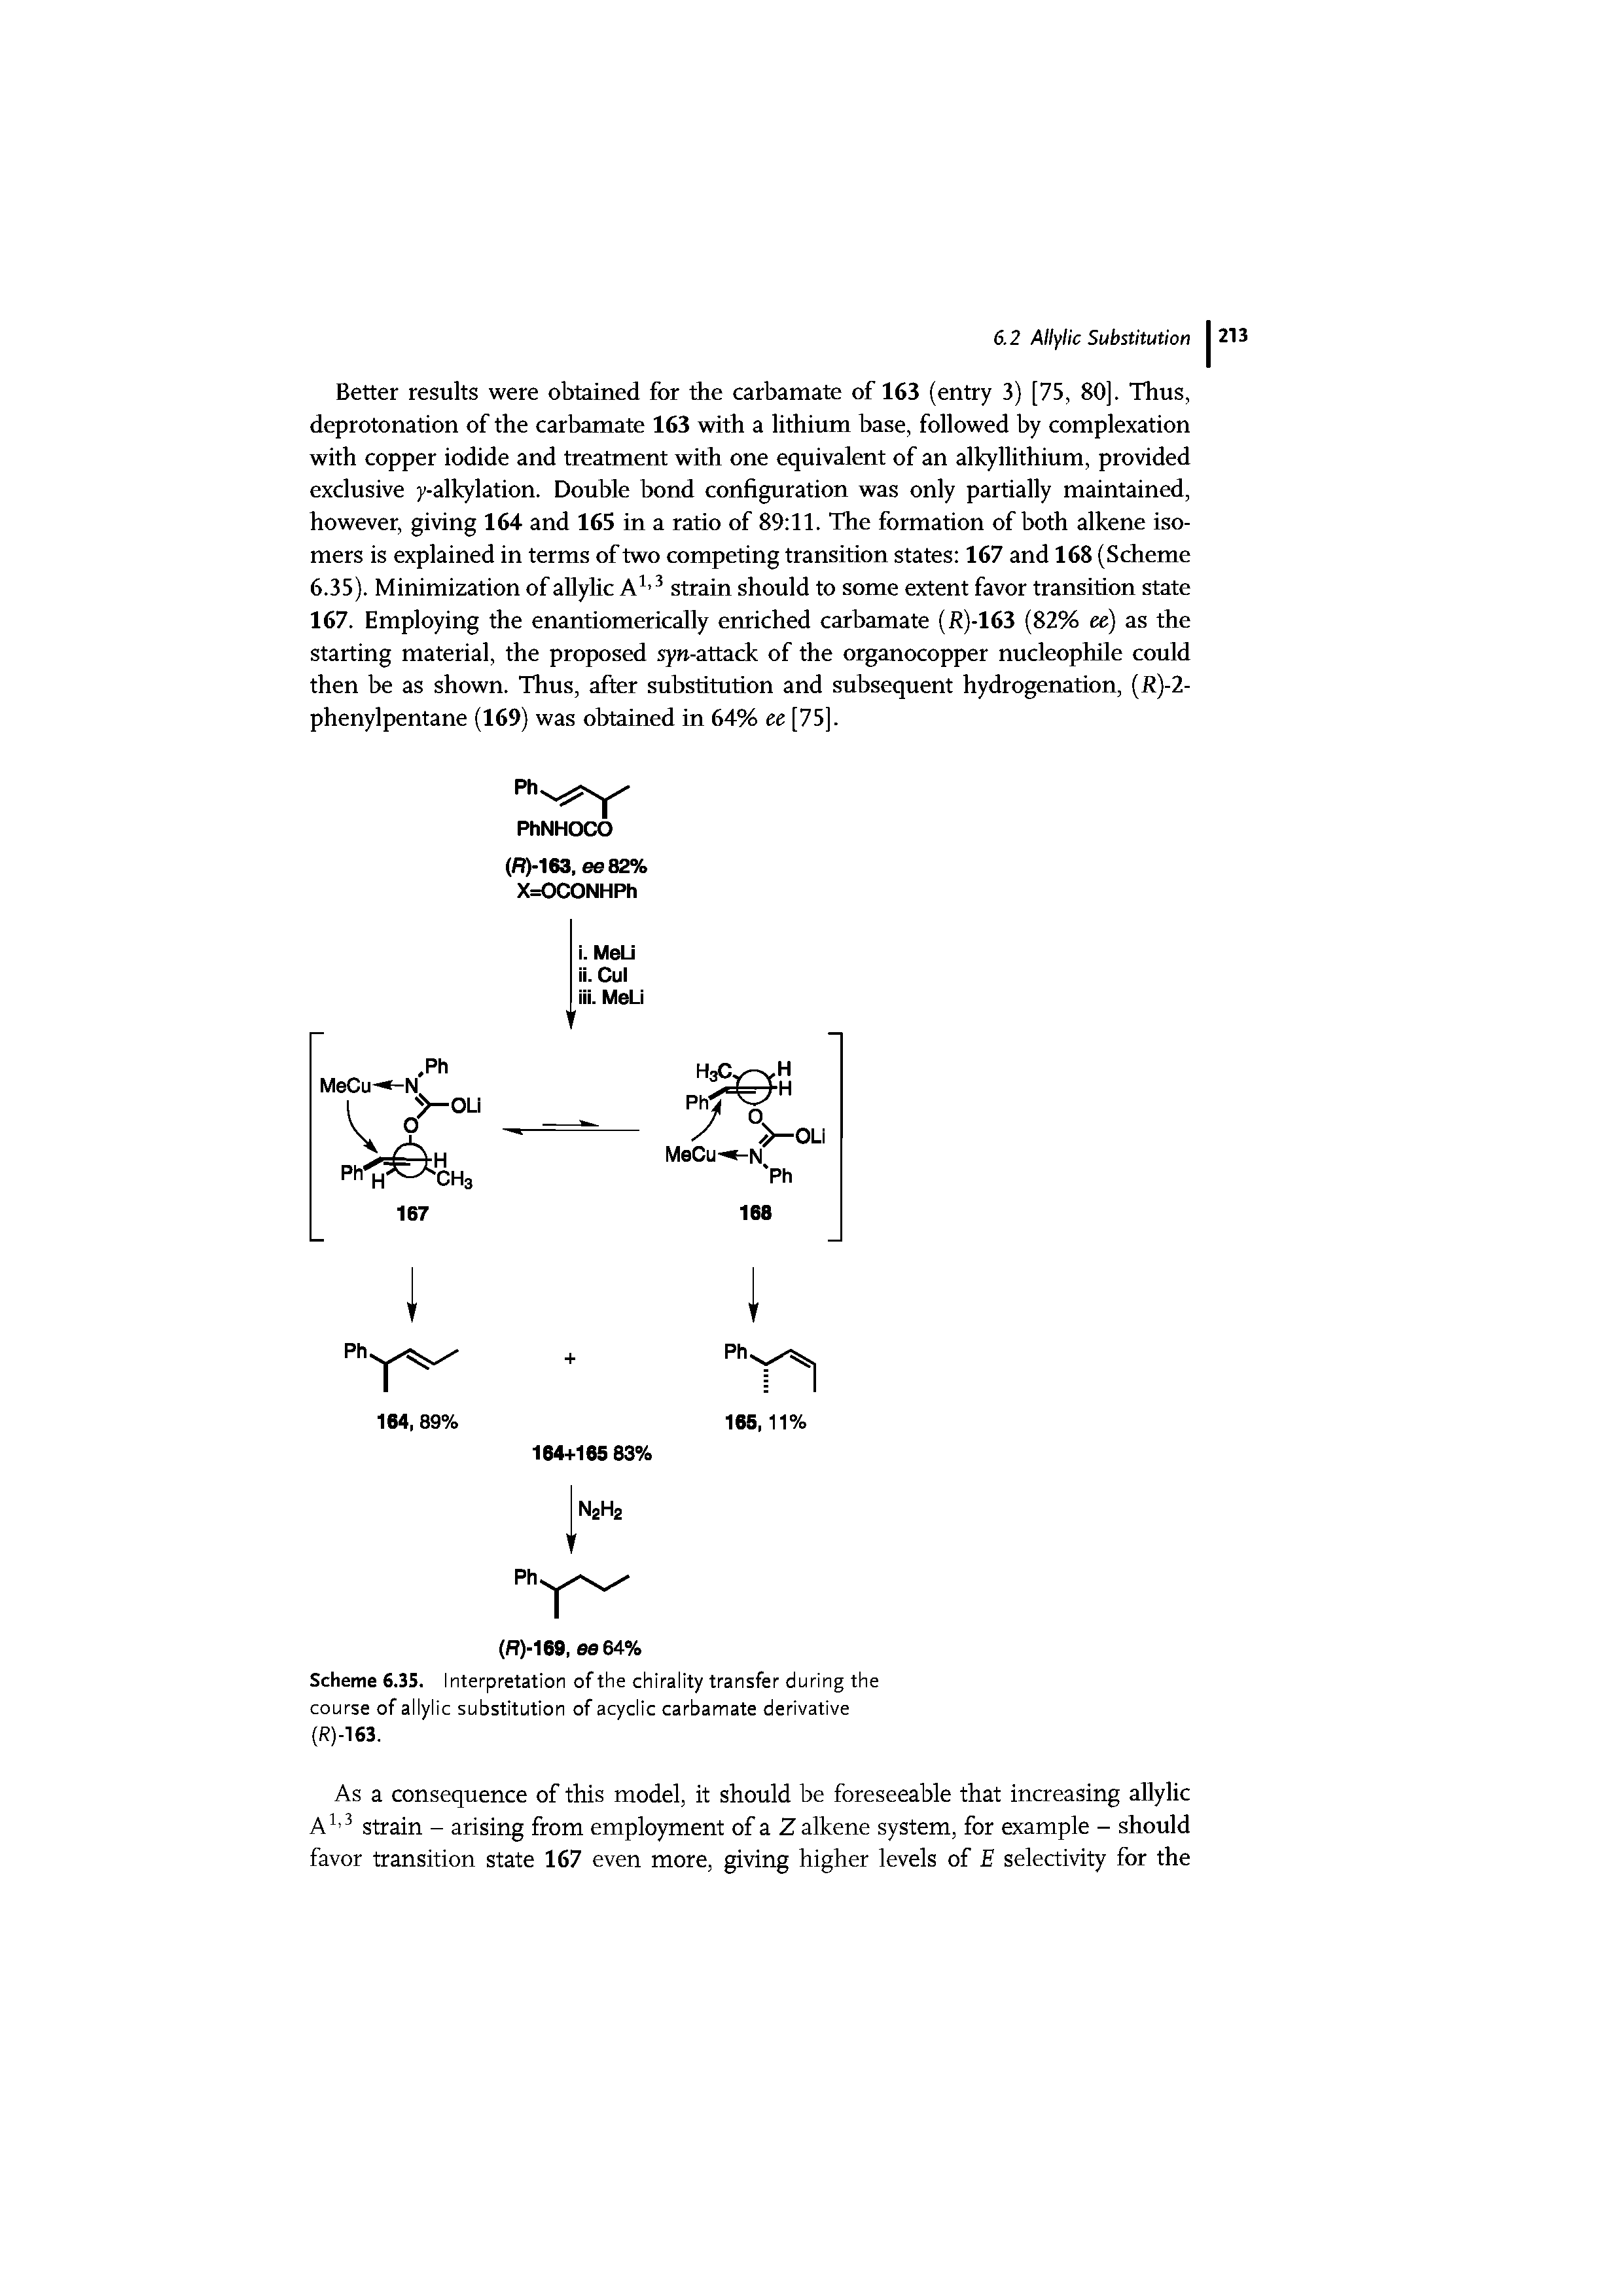 Scheme 6.3S. Interpretation of the chirality transfer during the course of allylic substitution of acyclic carbamate derivative (R)-163.